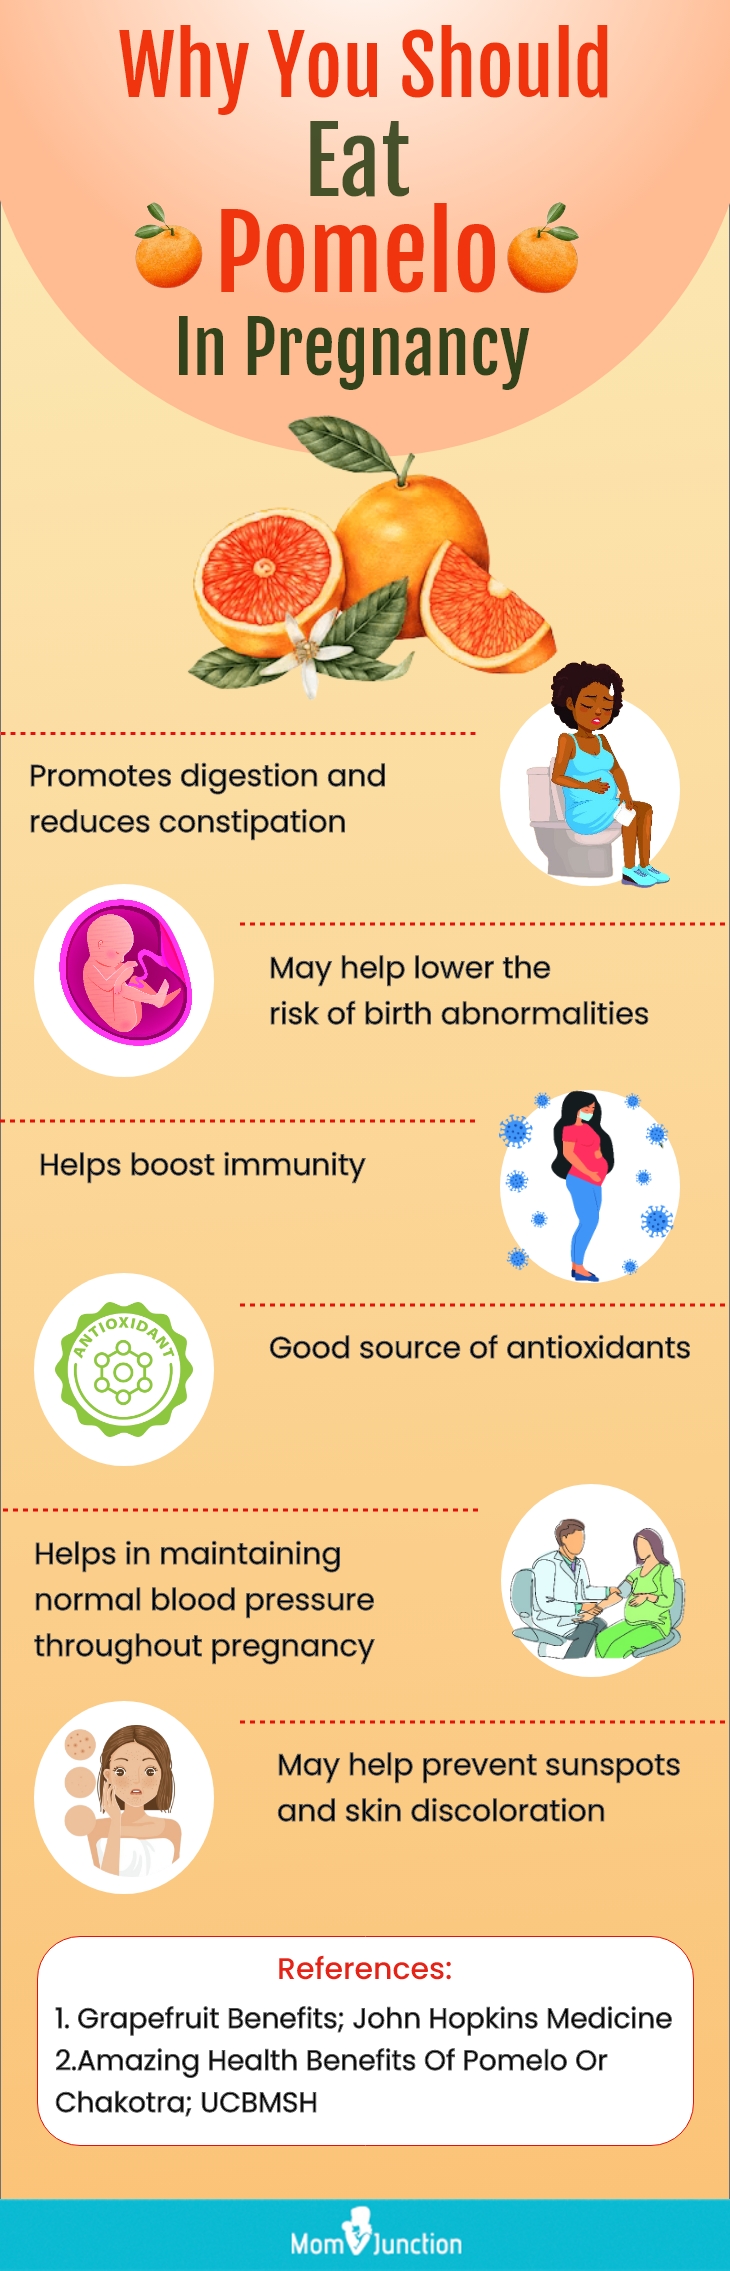 why you should eat pomelo in pregnancy (infographic)